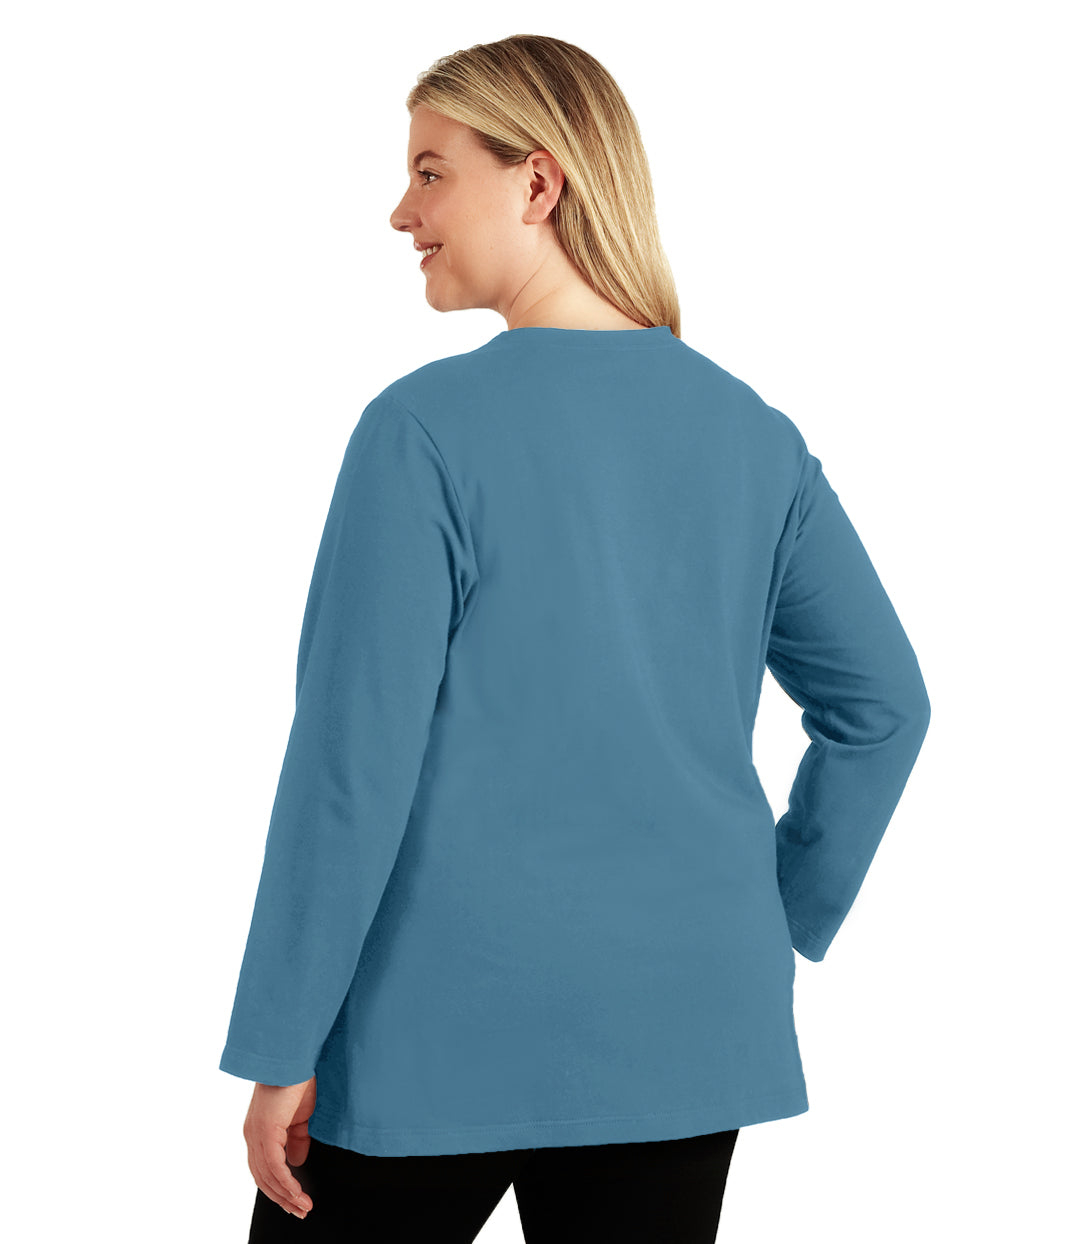 Plus size woman, facing back looking left, wearing JunoActive plus size Stretch Naturals Long Sleeve V-Neck Top in the color Dusty Teal. She is wearing JunoActive Plus Size Leggings in the color Black.